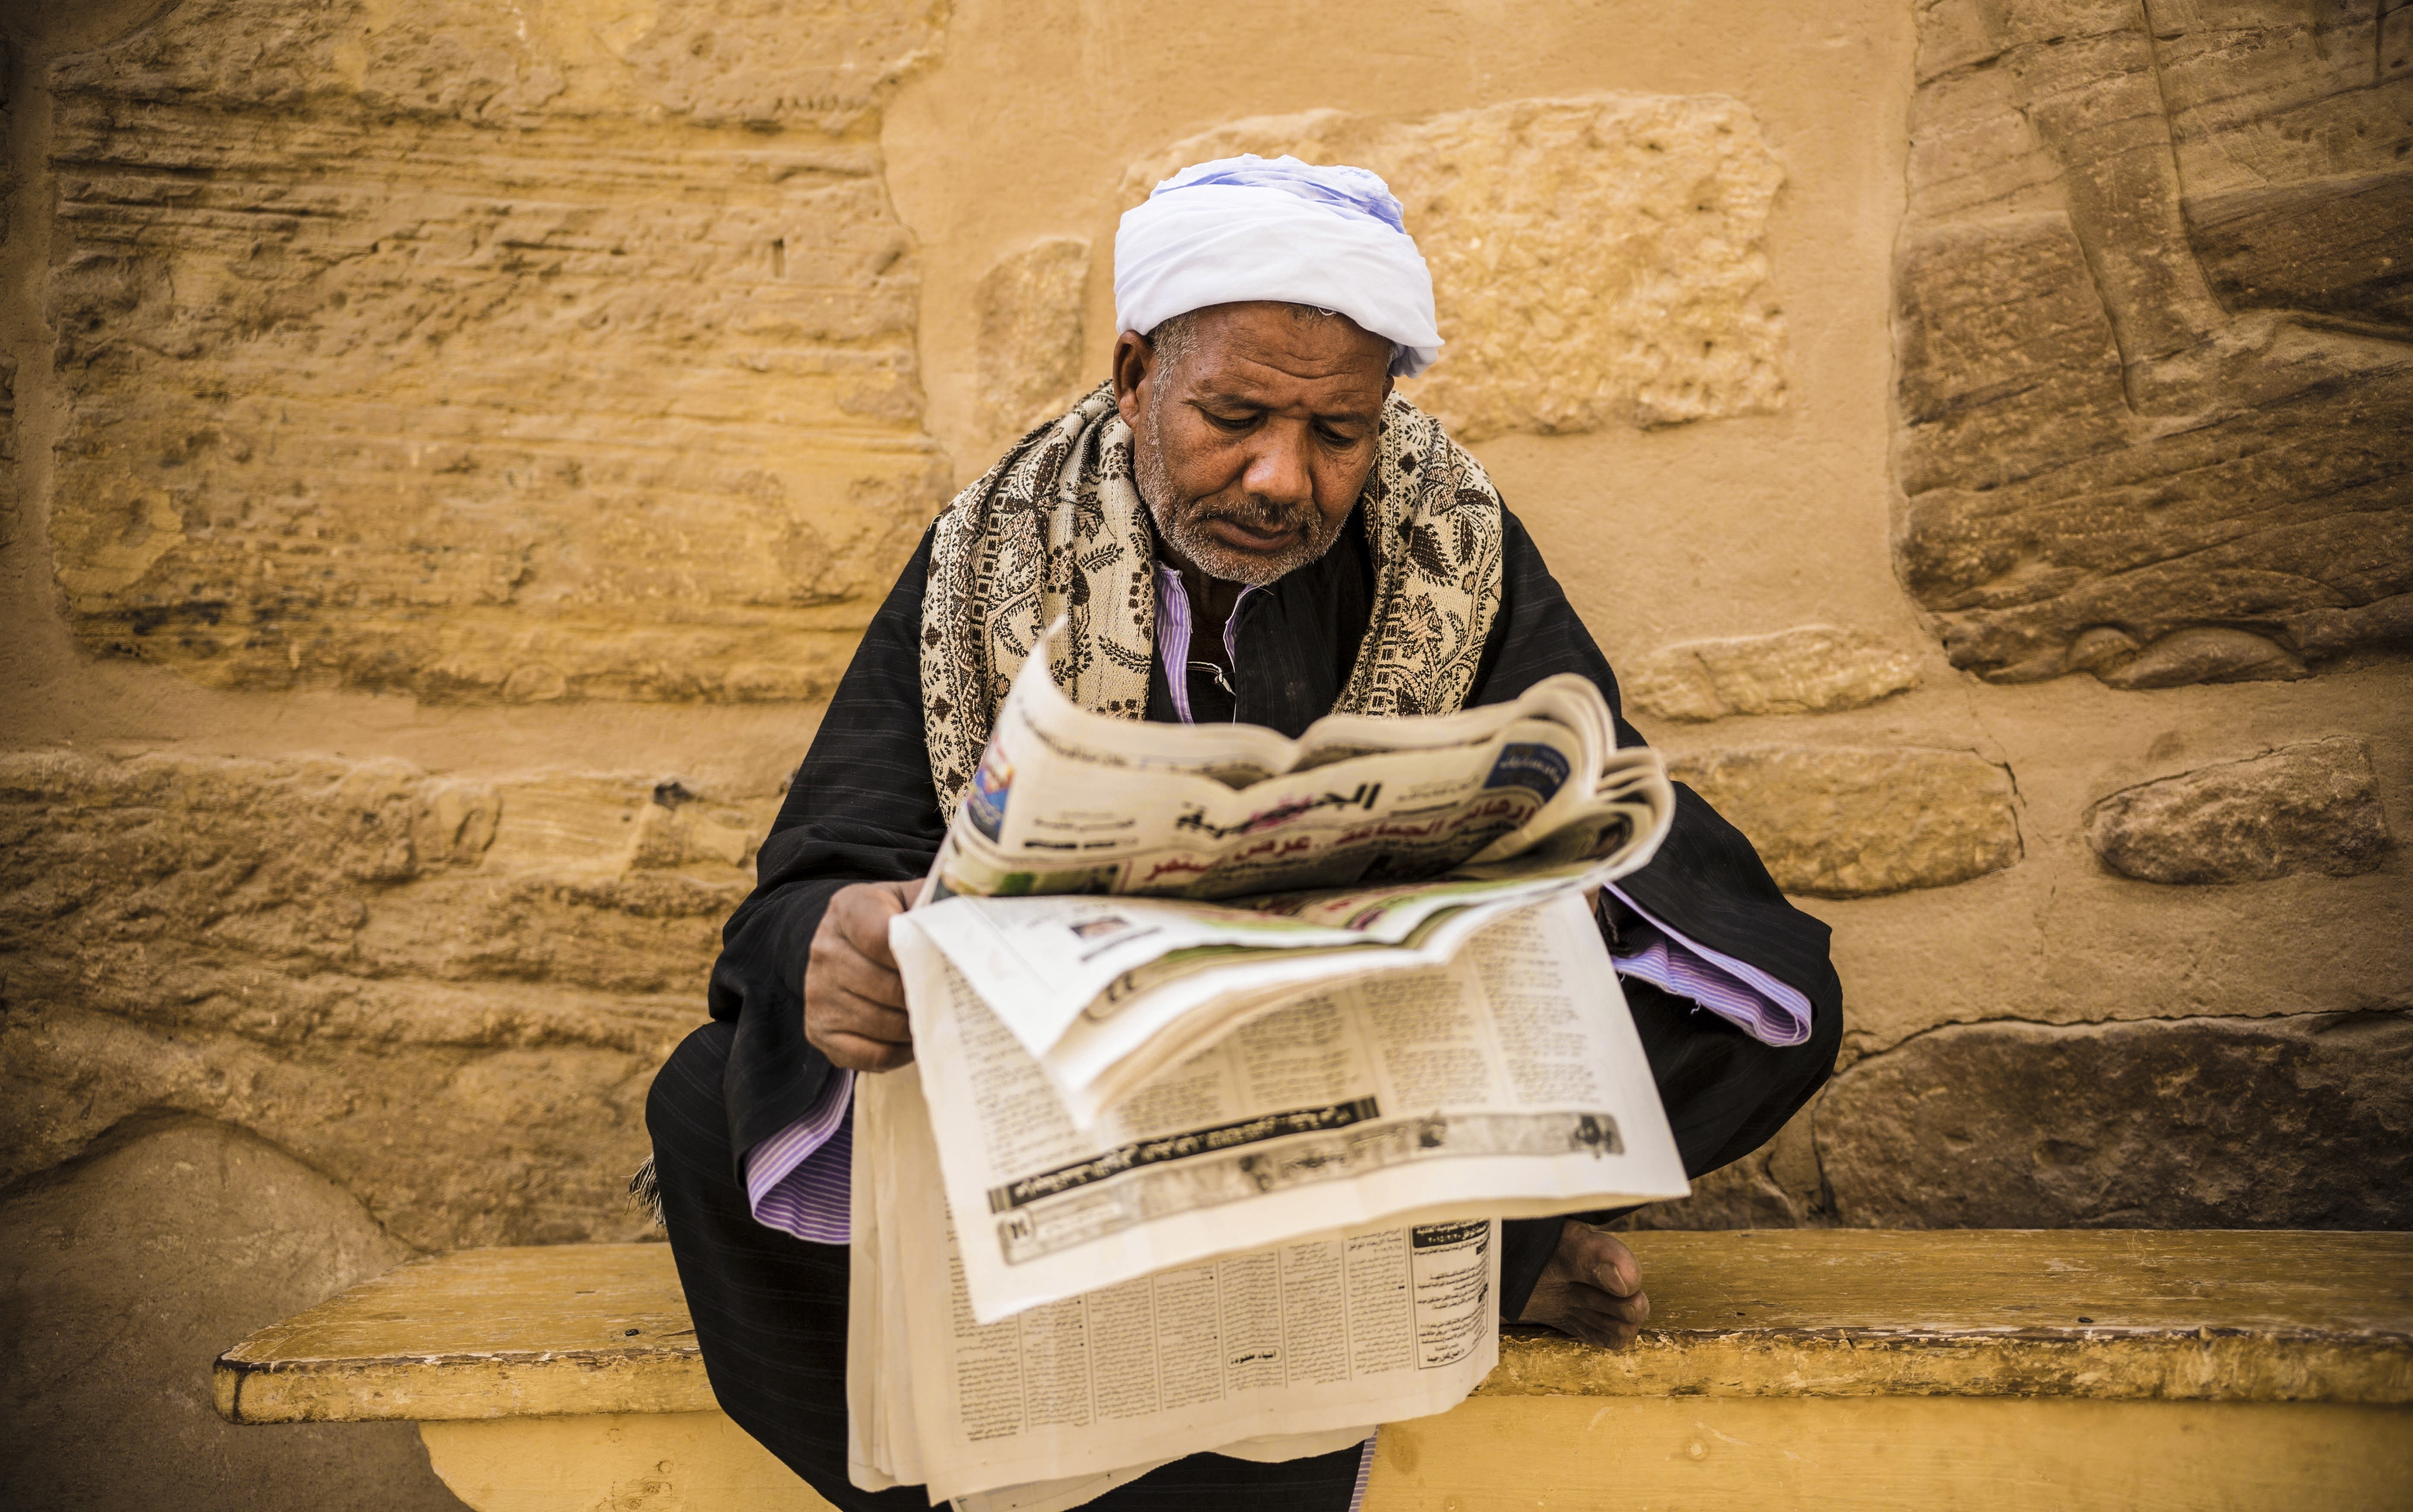 A tourist guide reads newspaper at Ramesses III. Mortuary Temple, also known as Medinet Habu Complex in west of Luxor, Egypt on February 19, 2015.